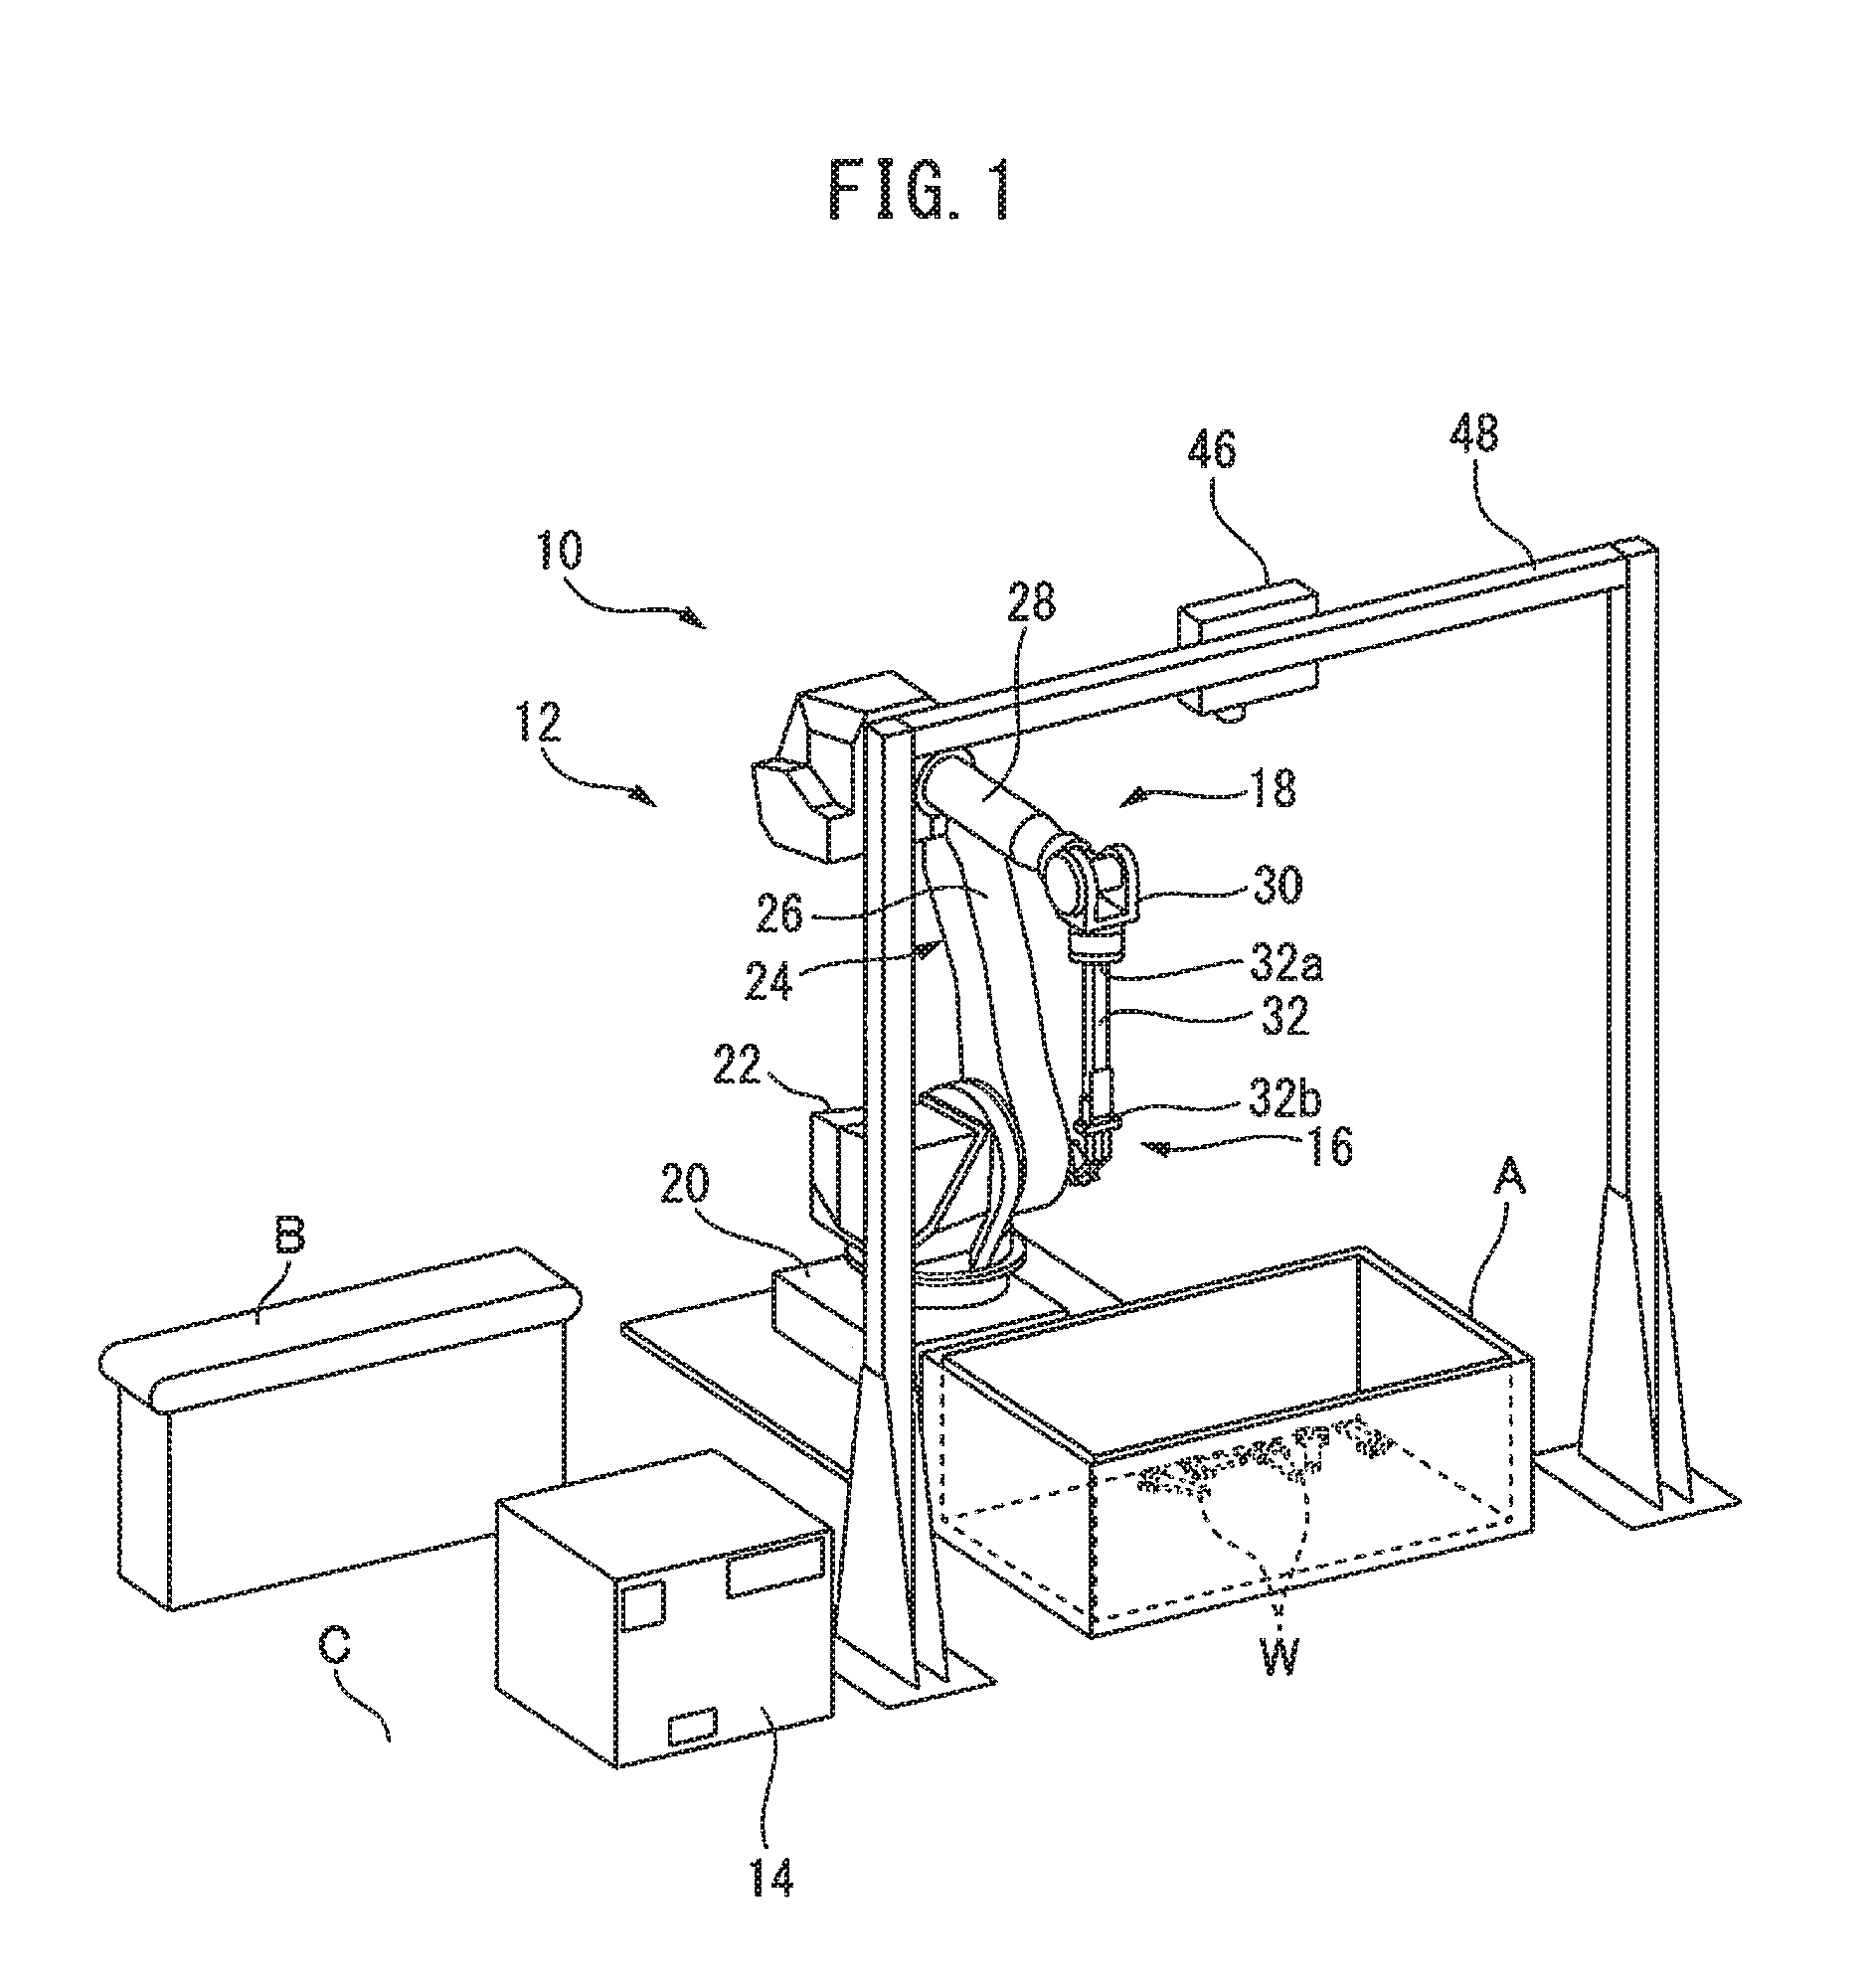 Object pick-up system and method for picking up stacked objects